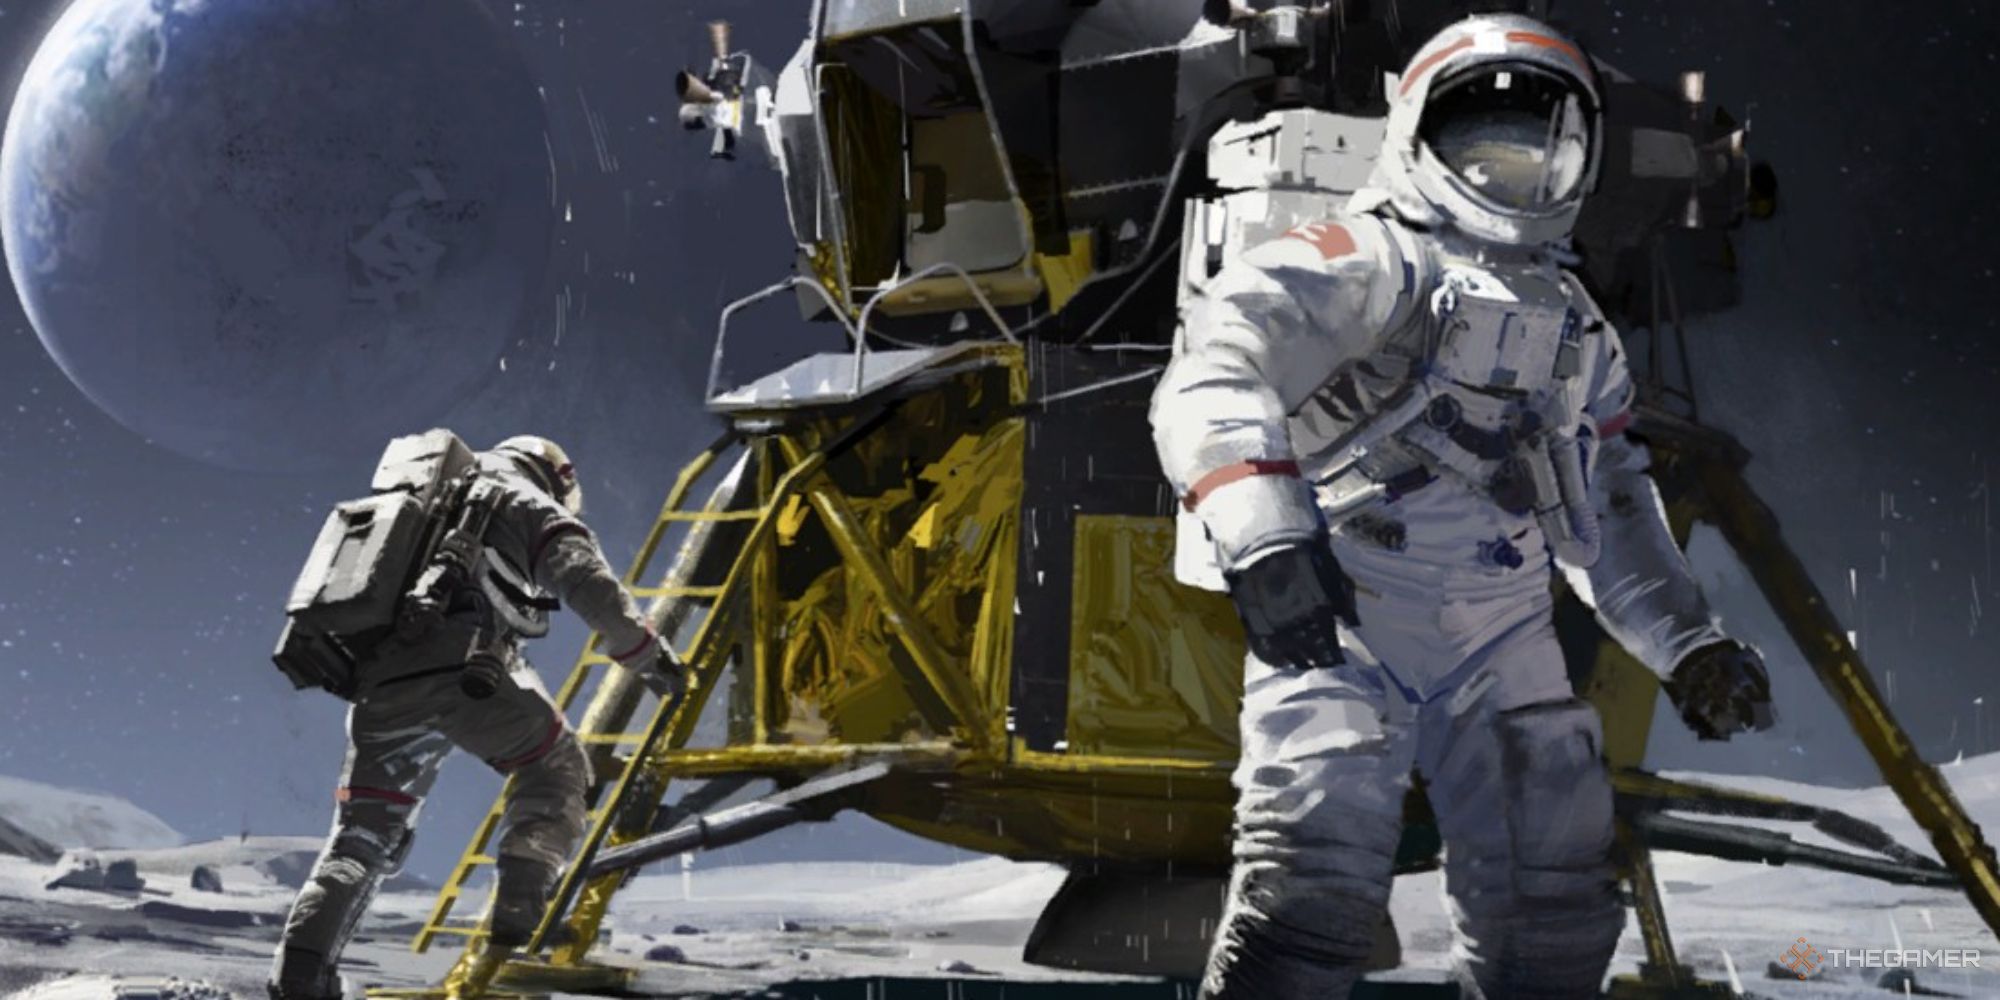 astronauts exit the lunar lander in the age of rocketry artwork in millennia